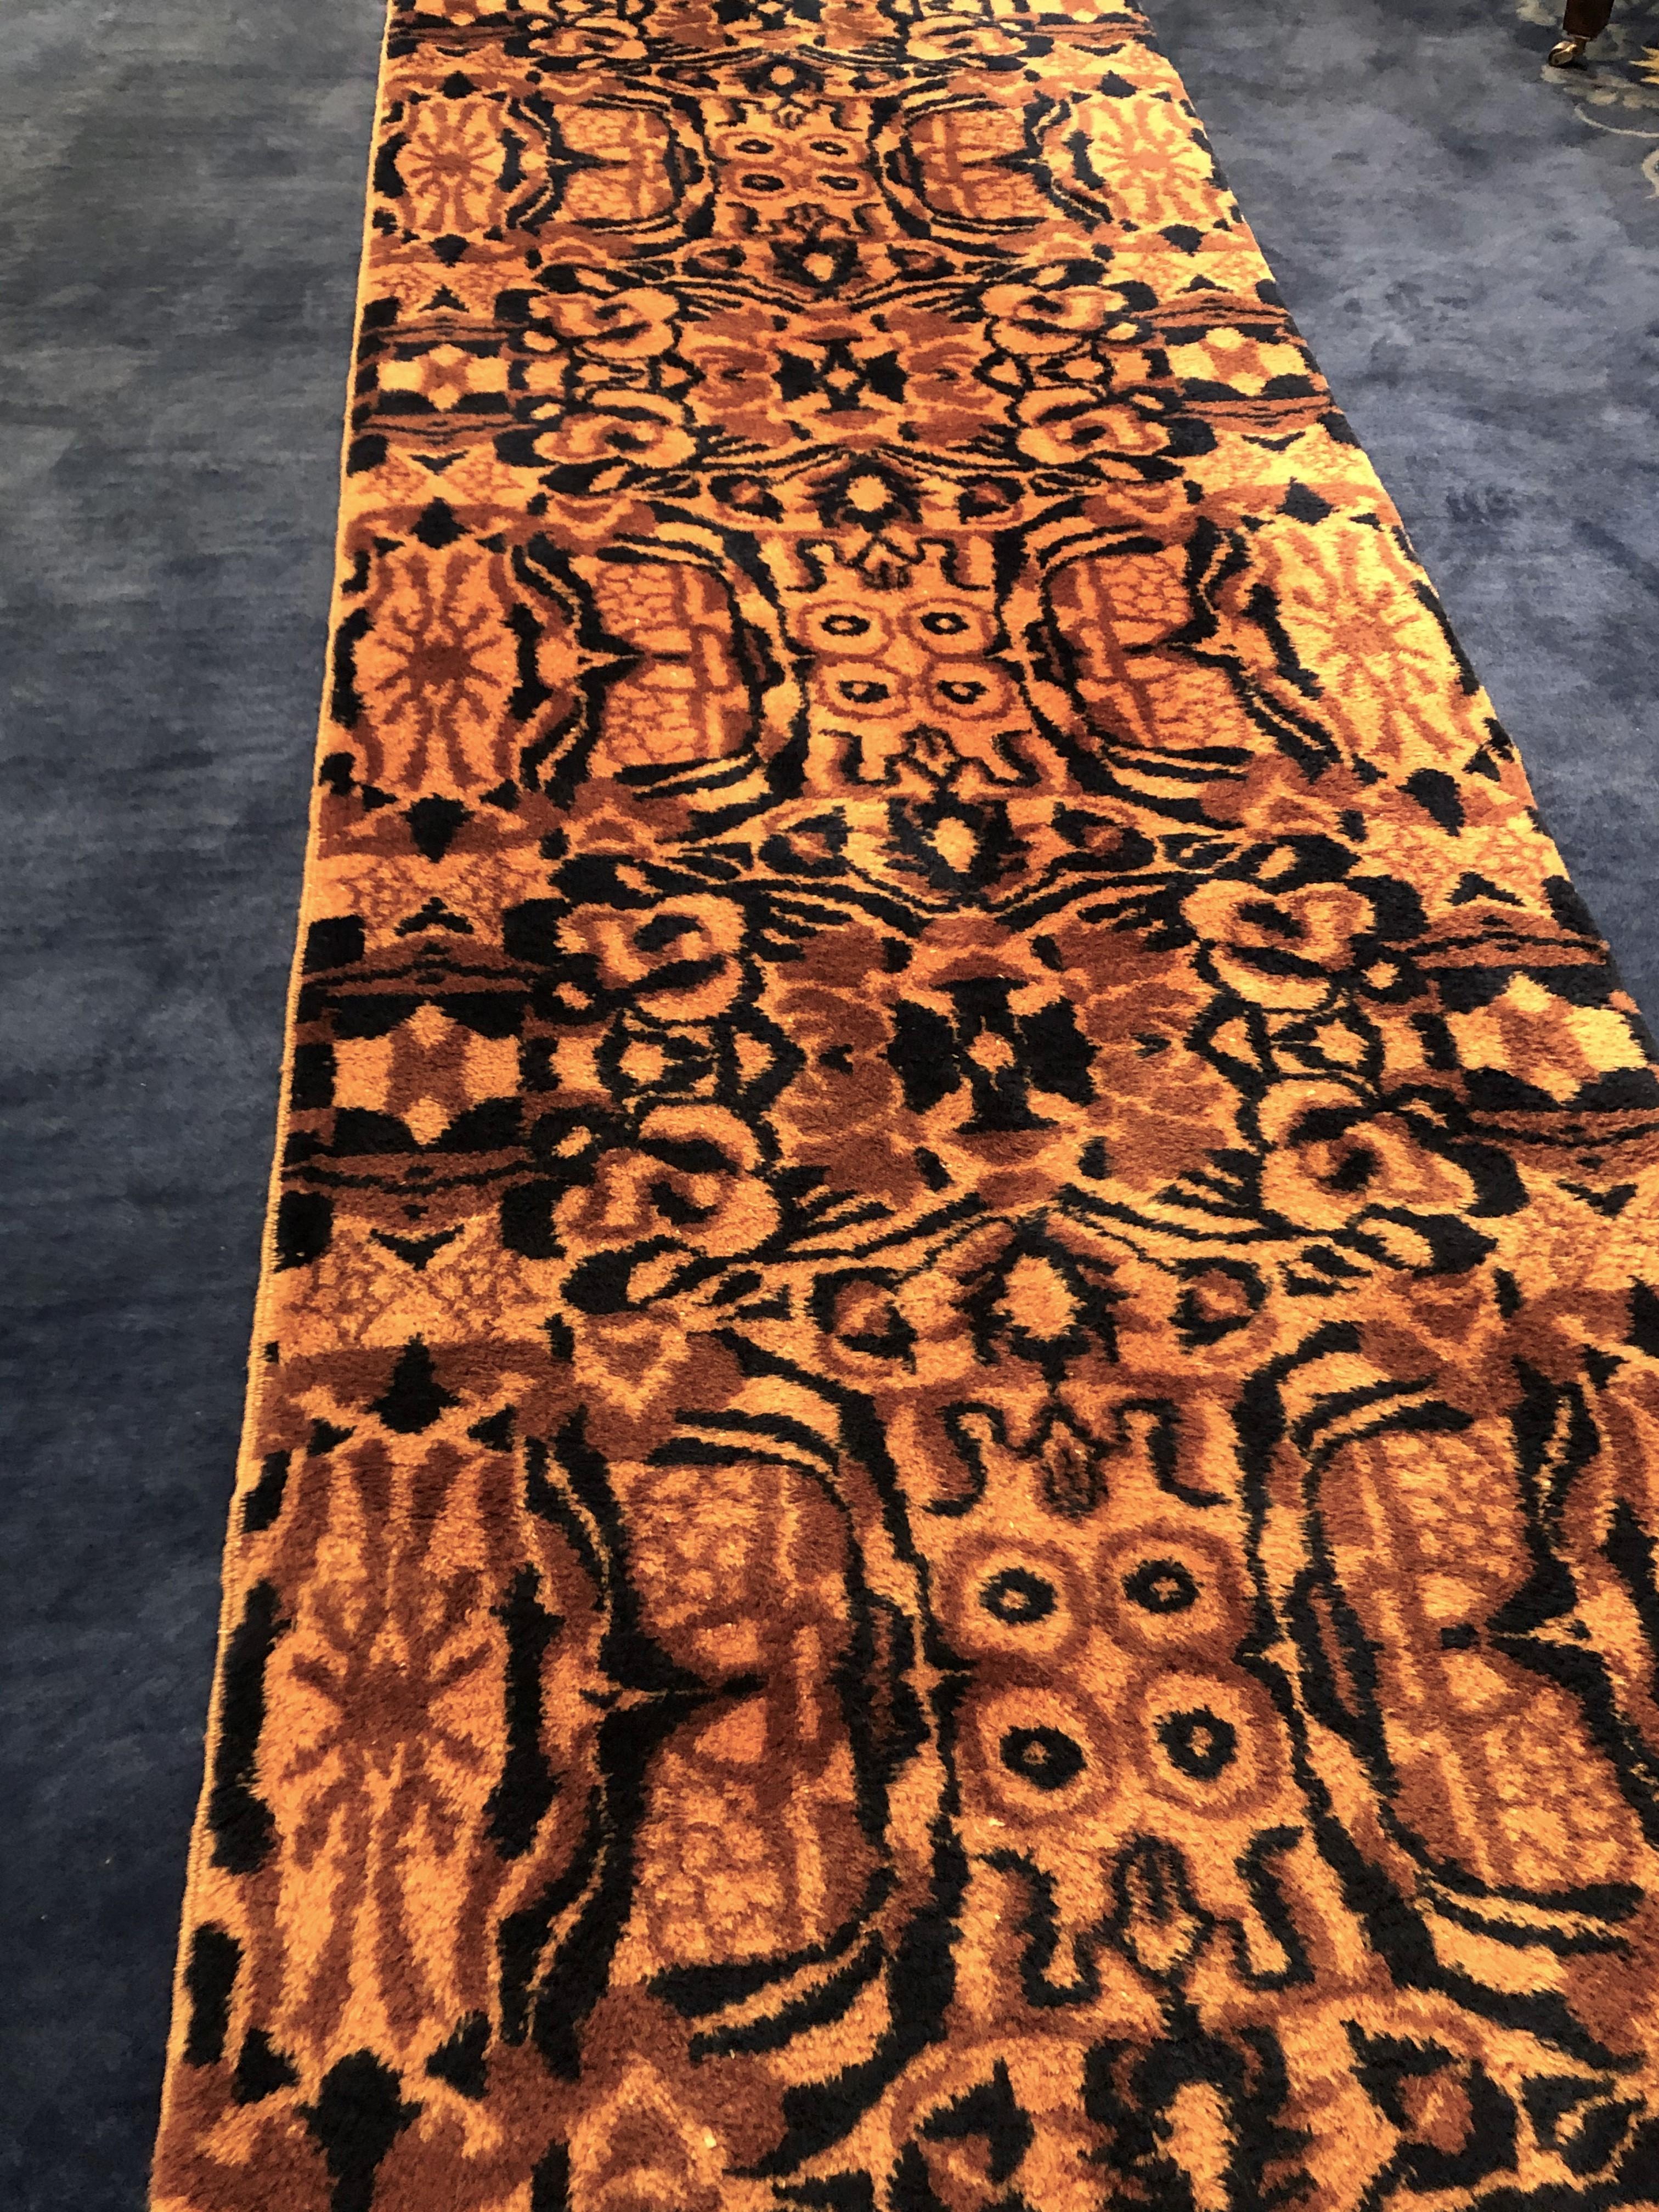 Iconic carpet of the production designed by Zeki Muren, a singer and designer much appreciated in the 1950s as well as for his skills as an artist for his eccentric style that characterized his entire production. His style and taste influenced the